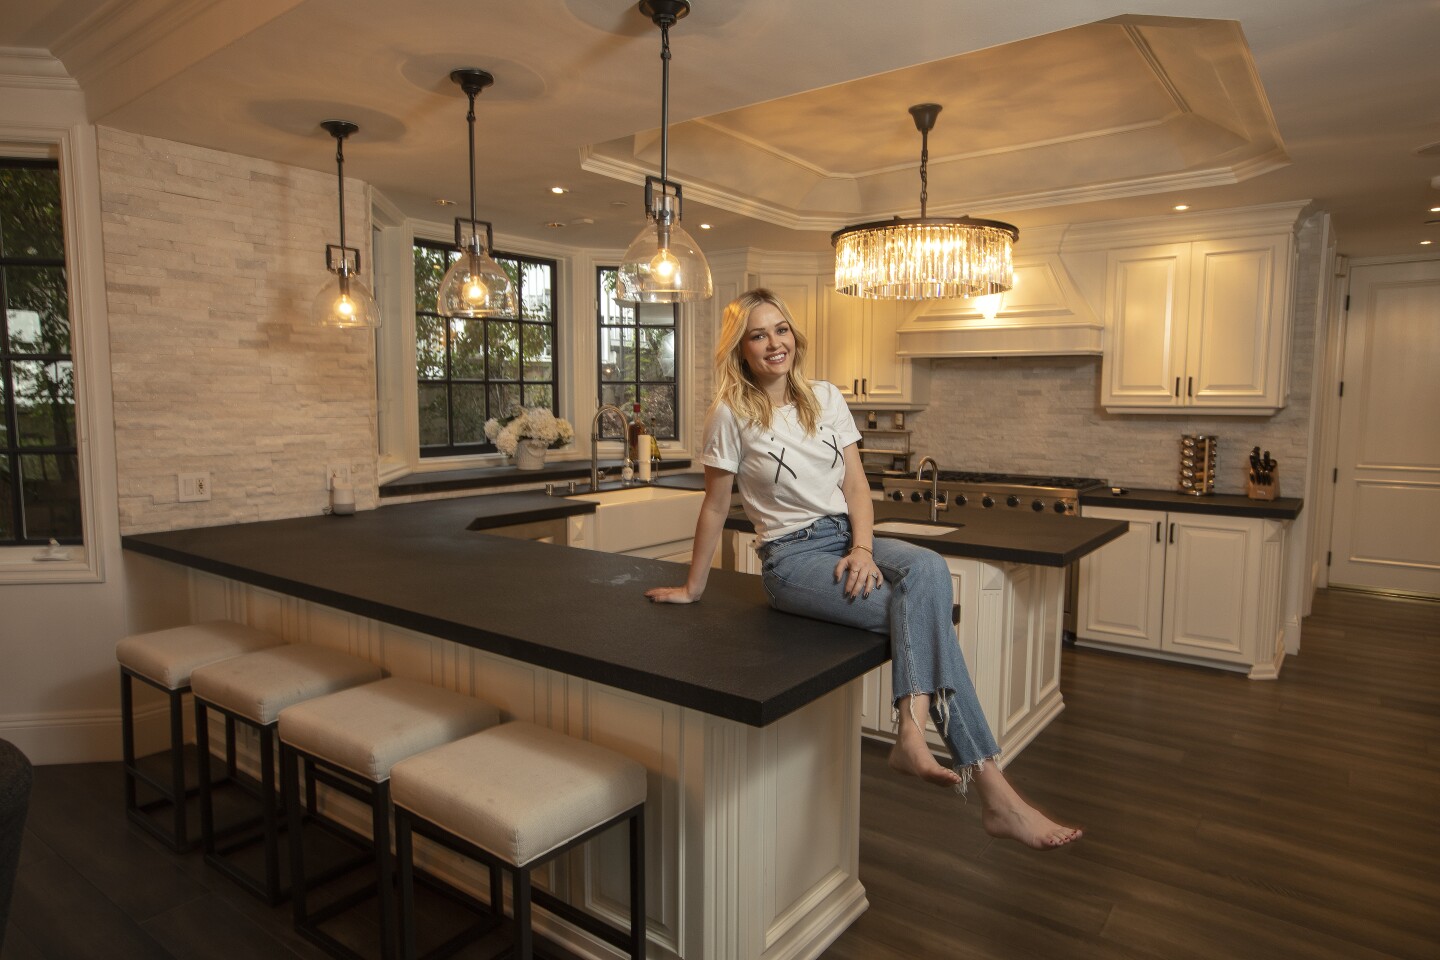 LOS ANGELES, CA-NOVEMBER 20, 2019: Actress Ambyr Childers, the new lead of the next season of the Netflix series, “You,” is photographed in her favorite room of her home in Los Angeles, the kitchen. (Mel Melcon/Los Angeles Times)